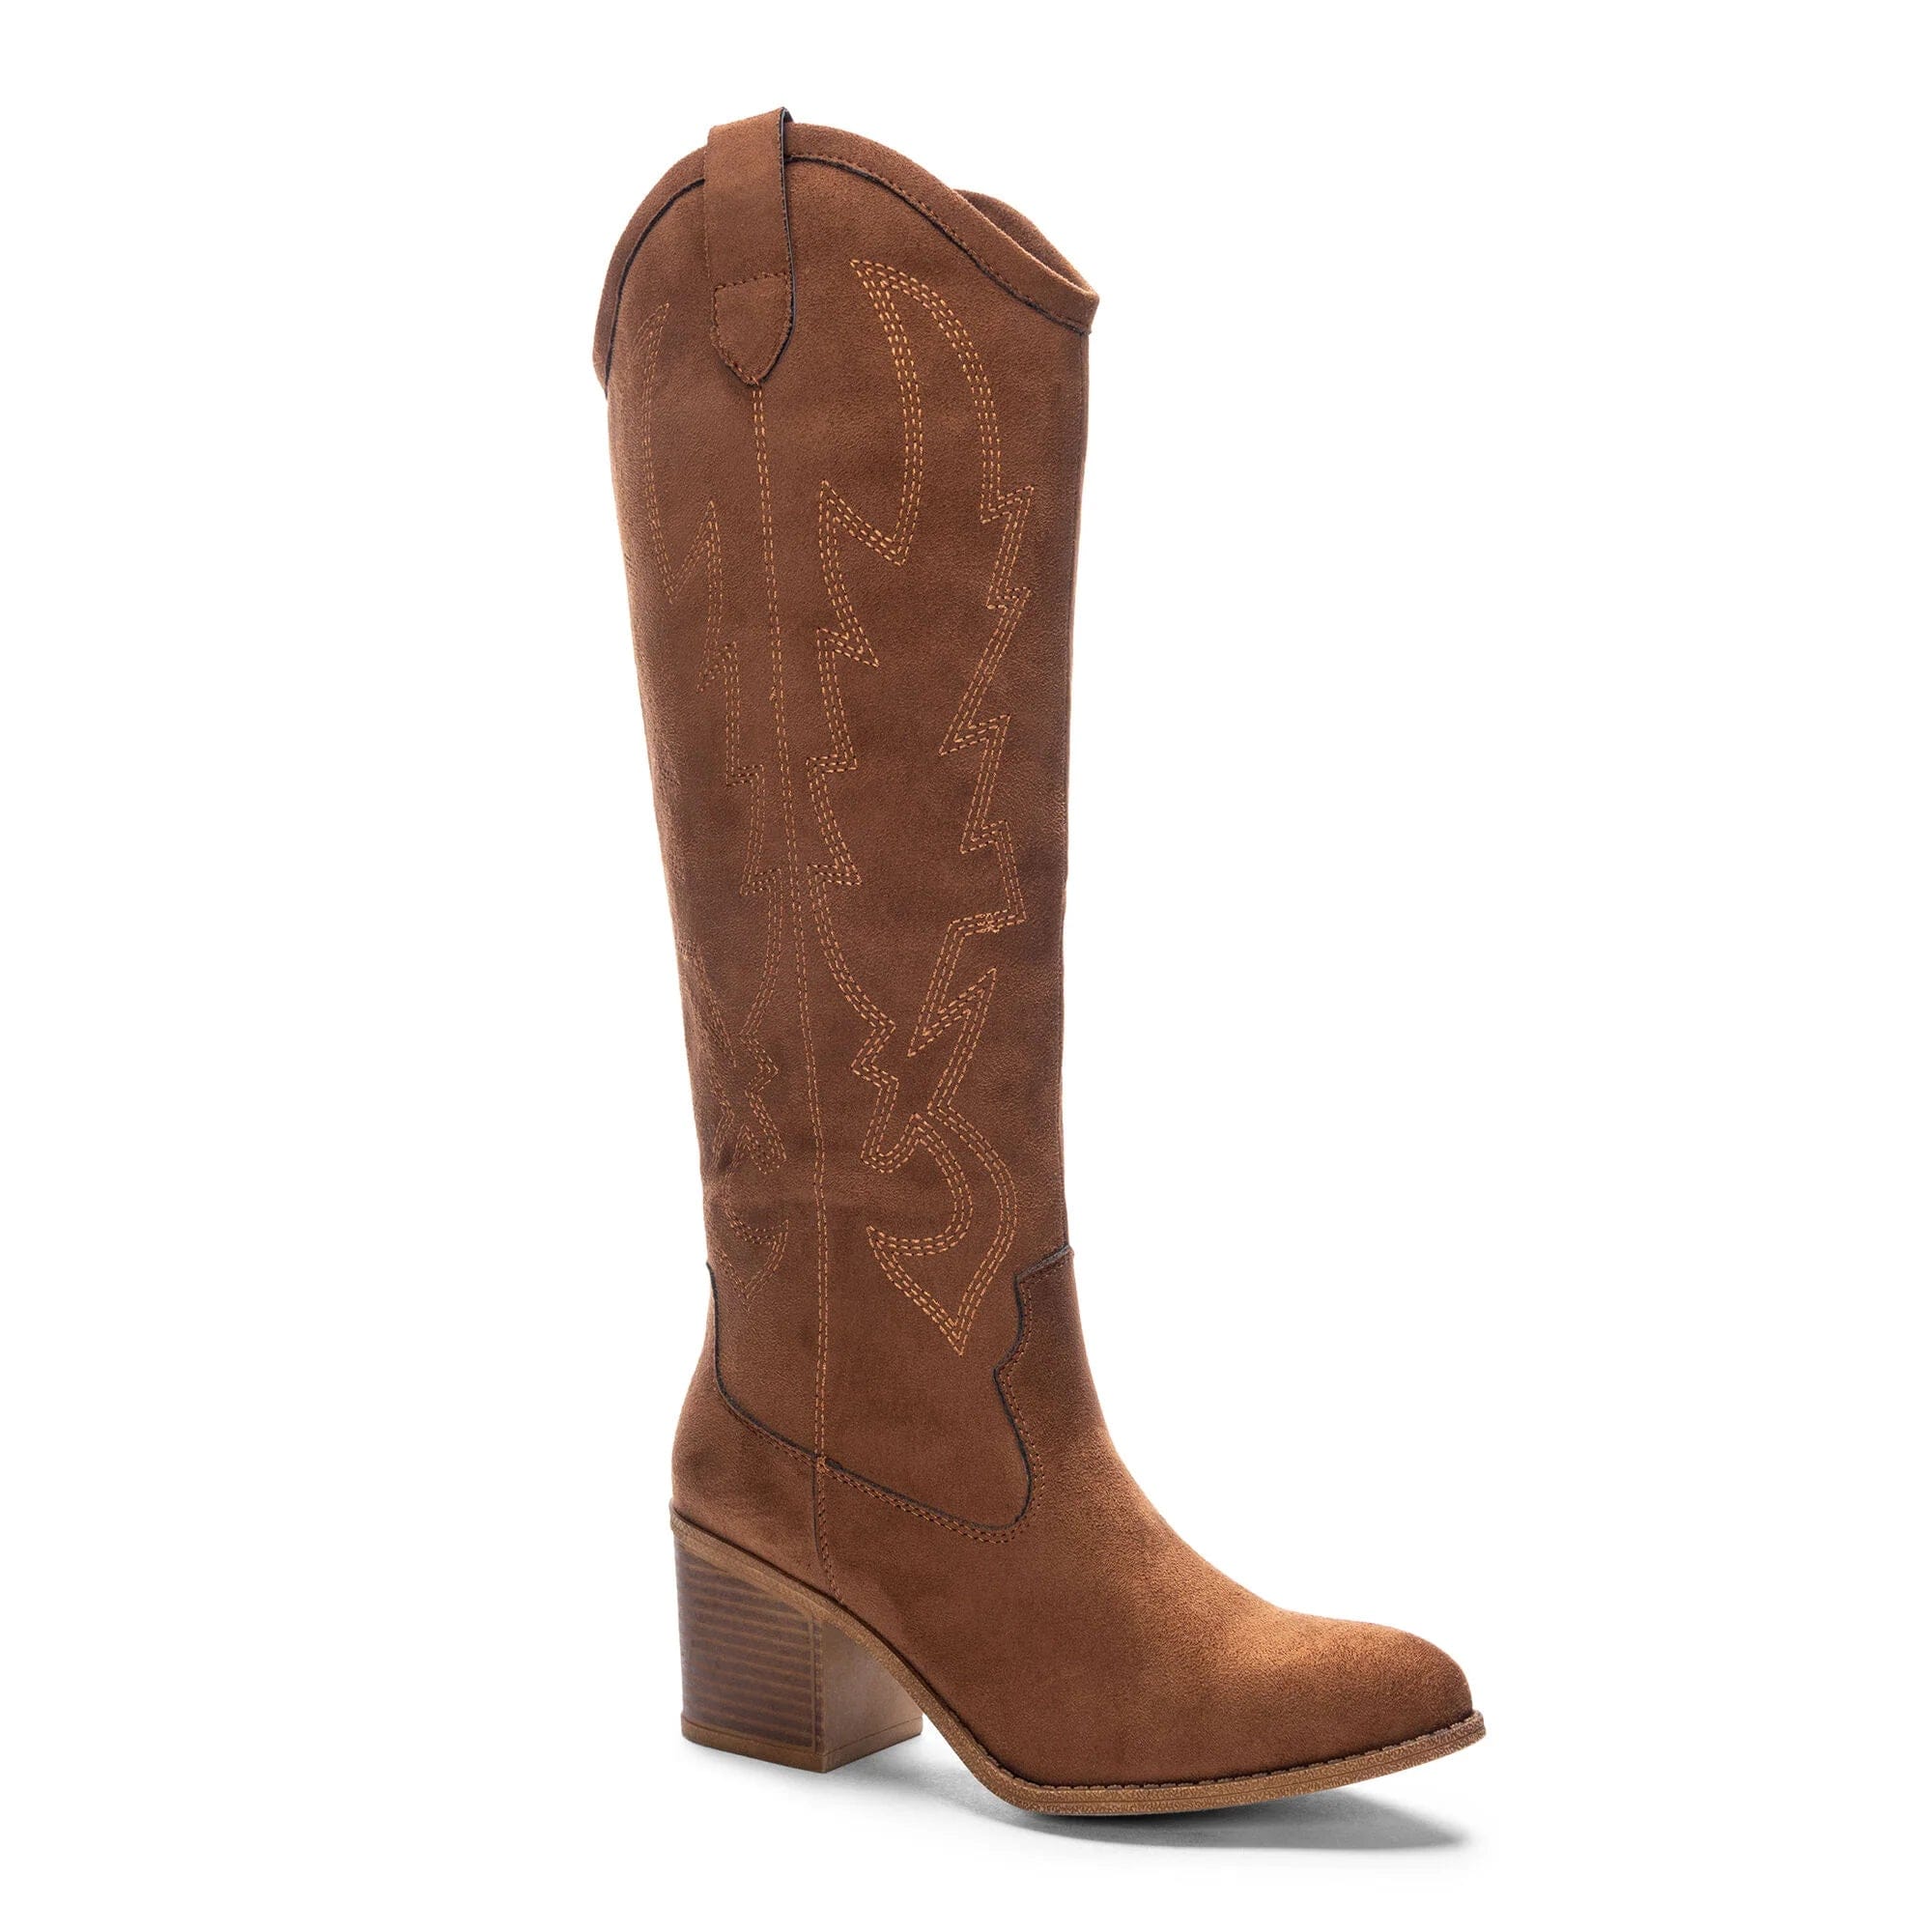 Dirty Laundry Upwind Western Boot-Brown Suede - Infinity Raine